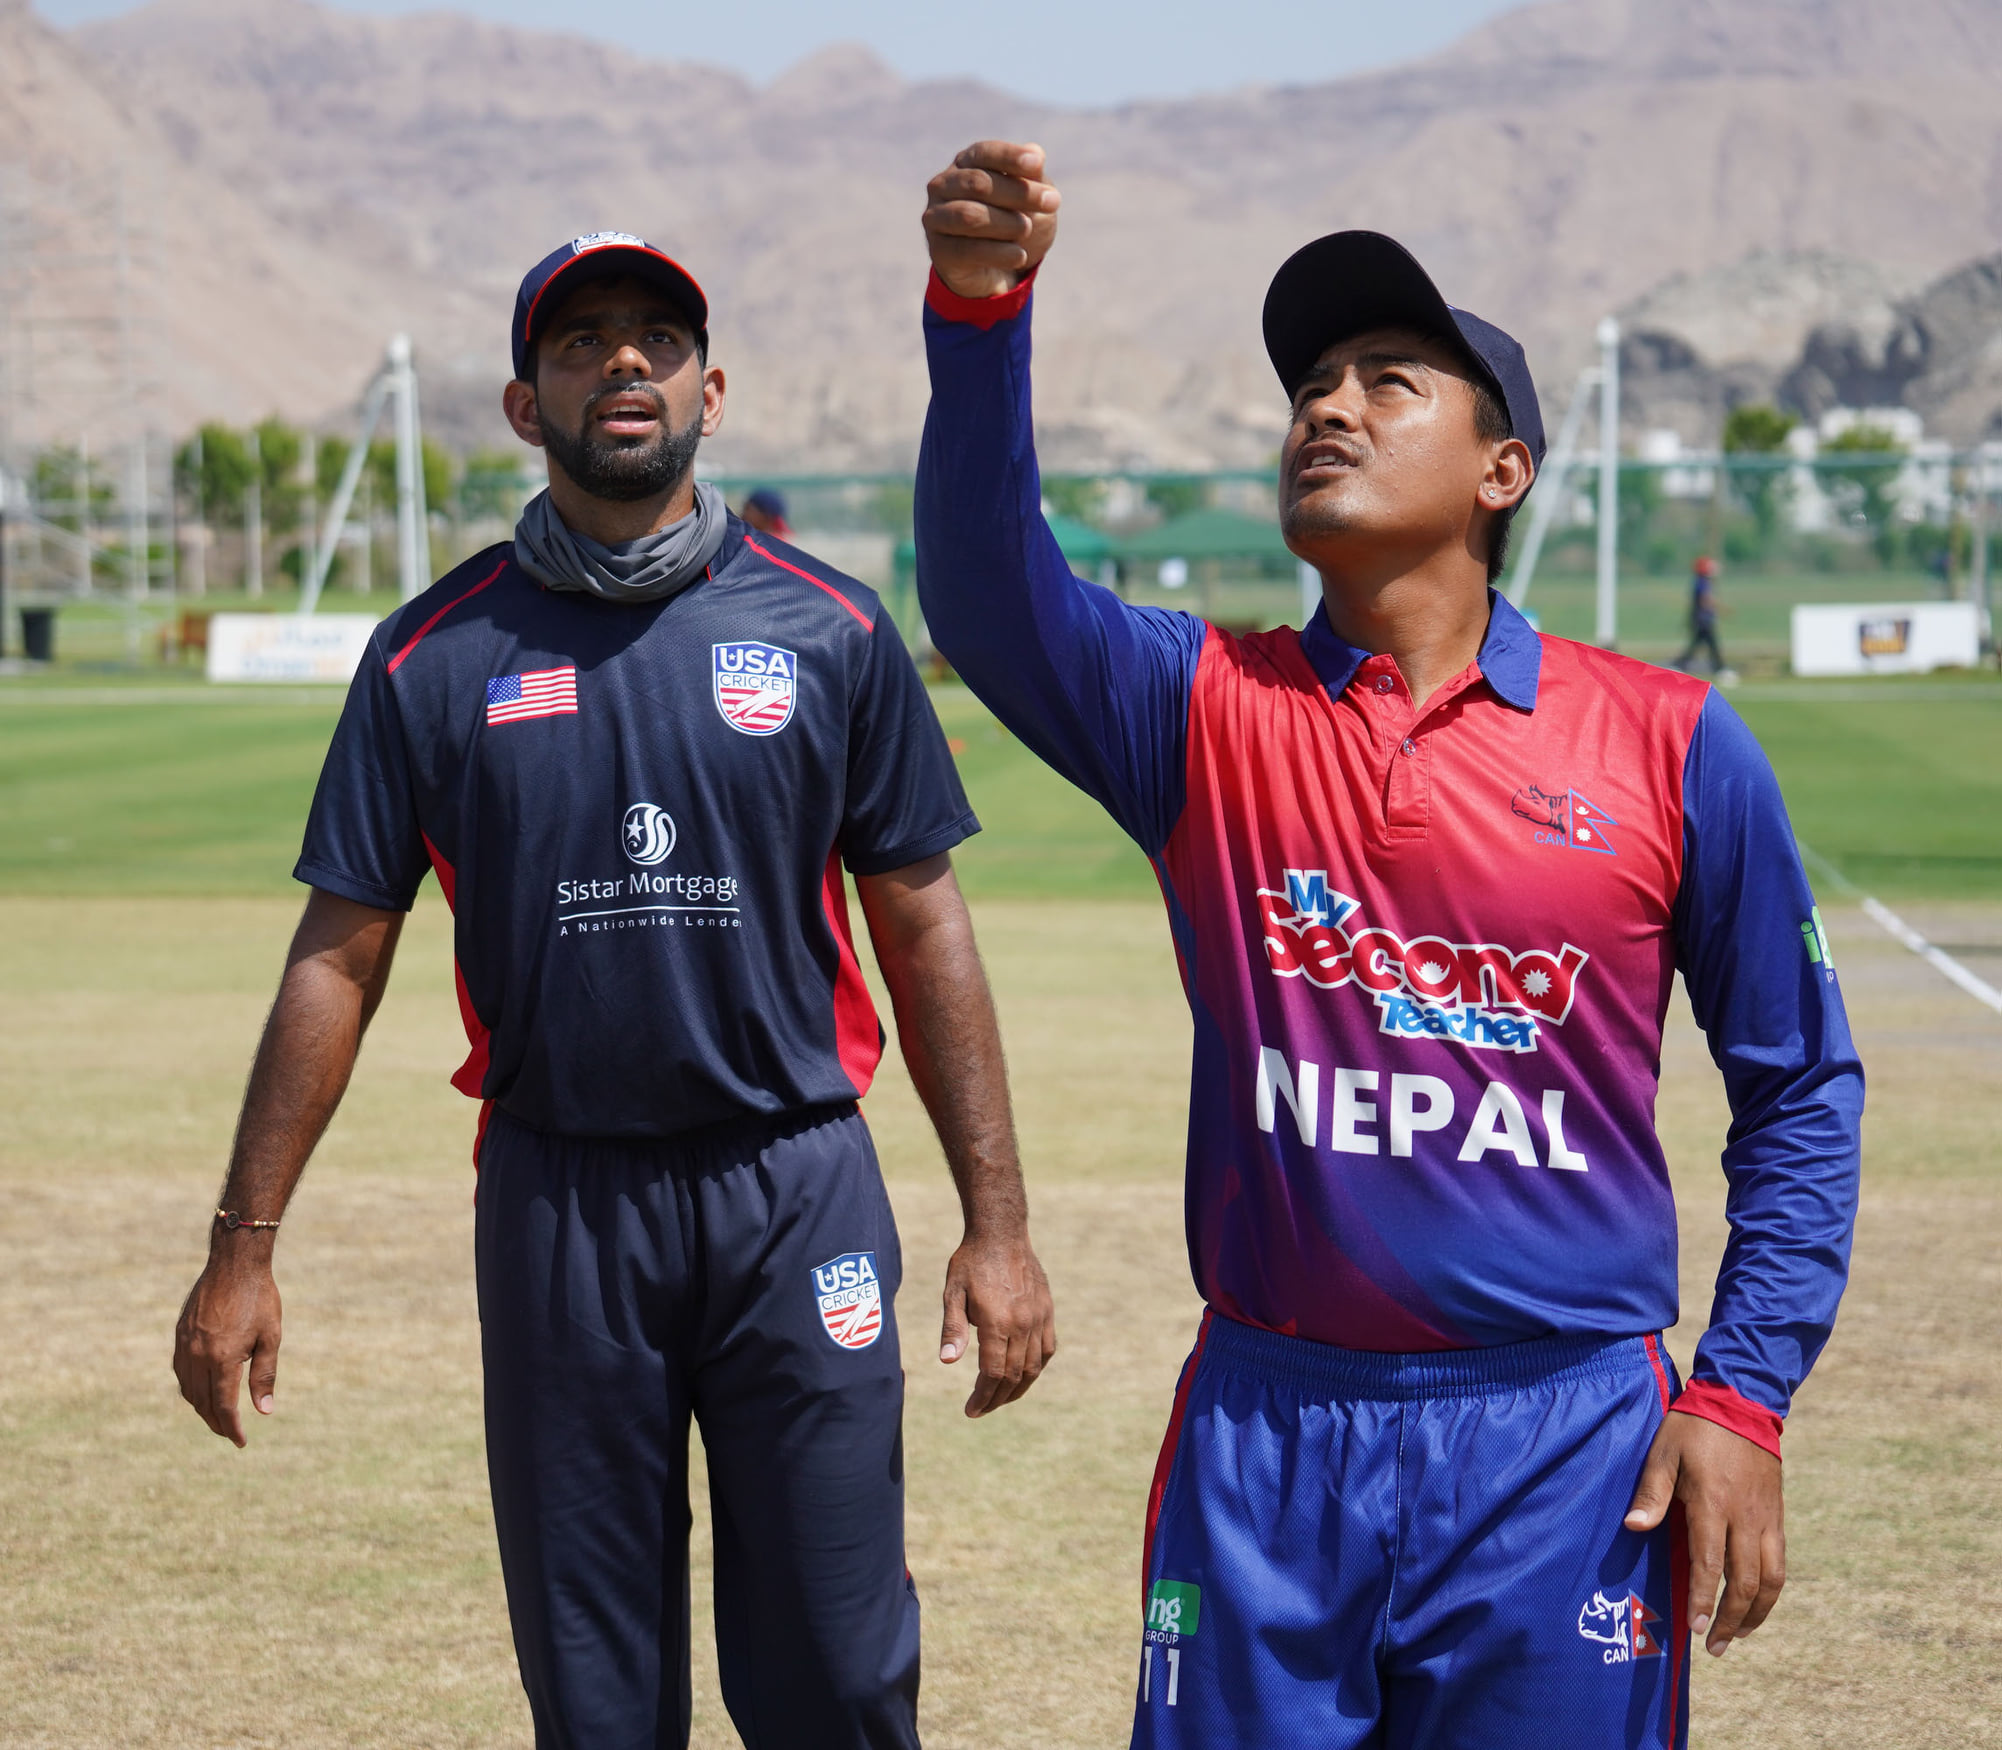 Nepal loses to USA by six wickets